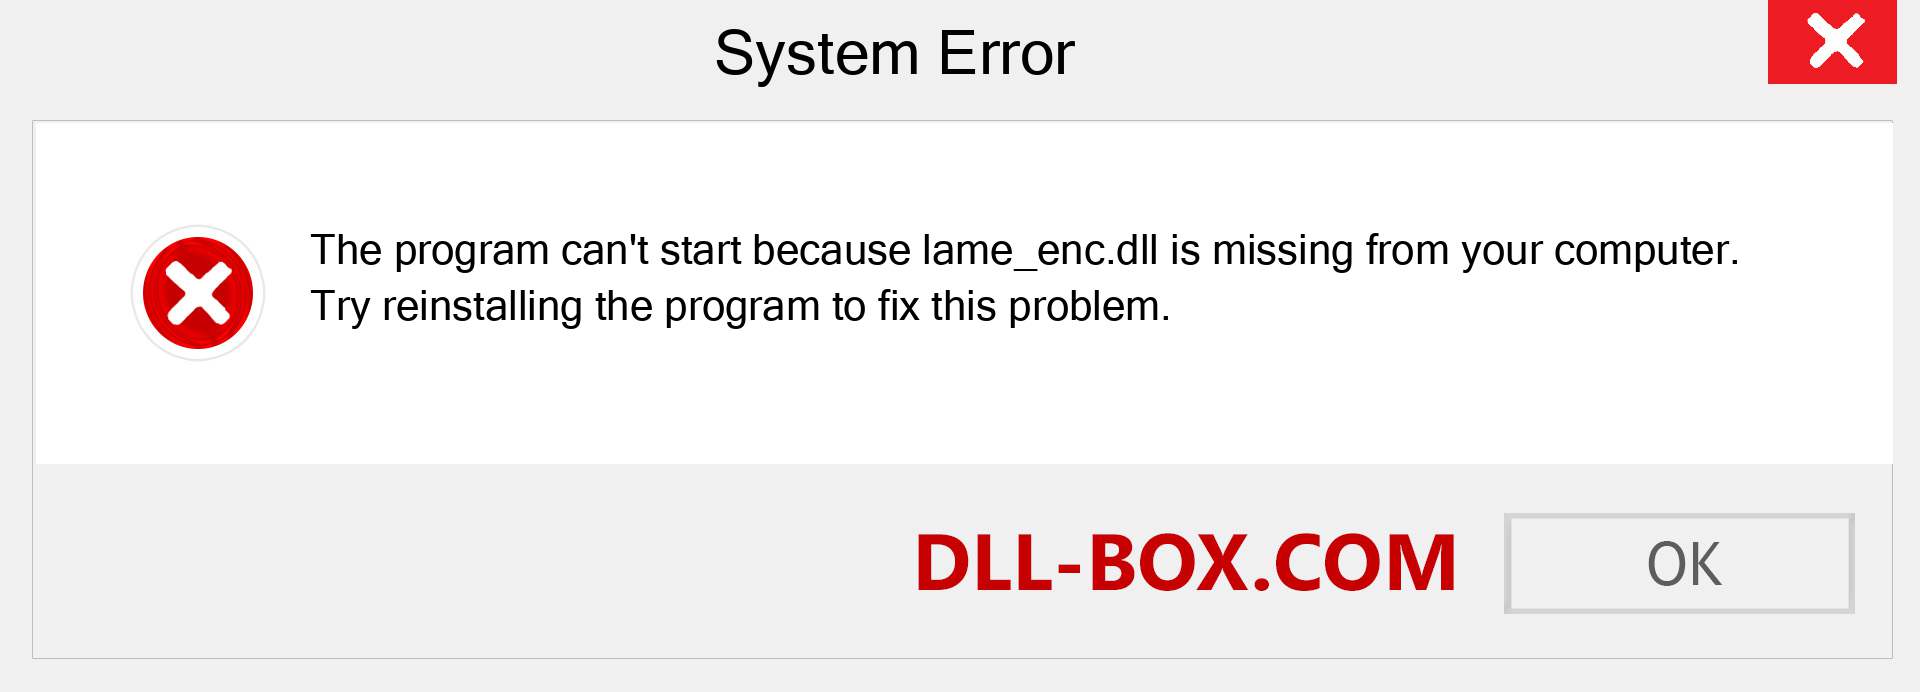  lame_enc.dll file is missing?. Download for Windows 7, 8, 10 - Fix  lame_enc dll Missing Error on Windows, photos, images